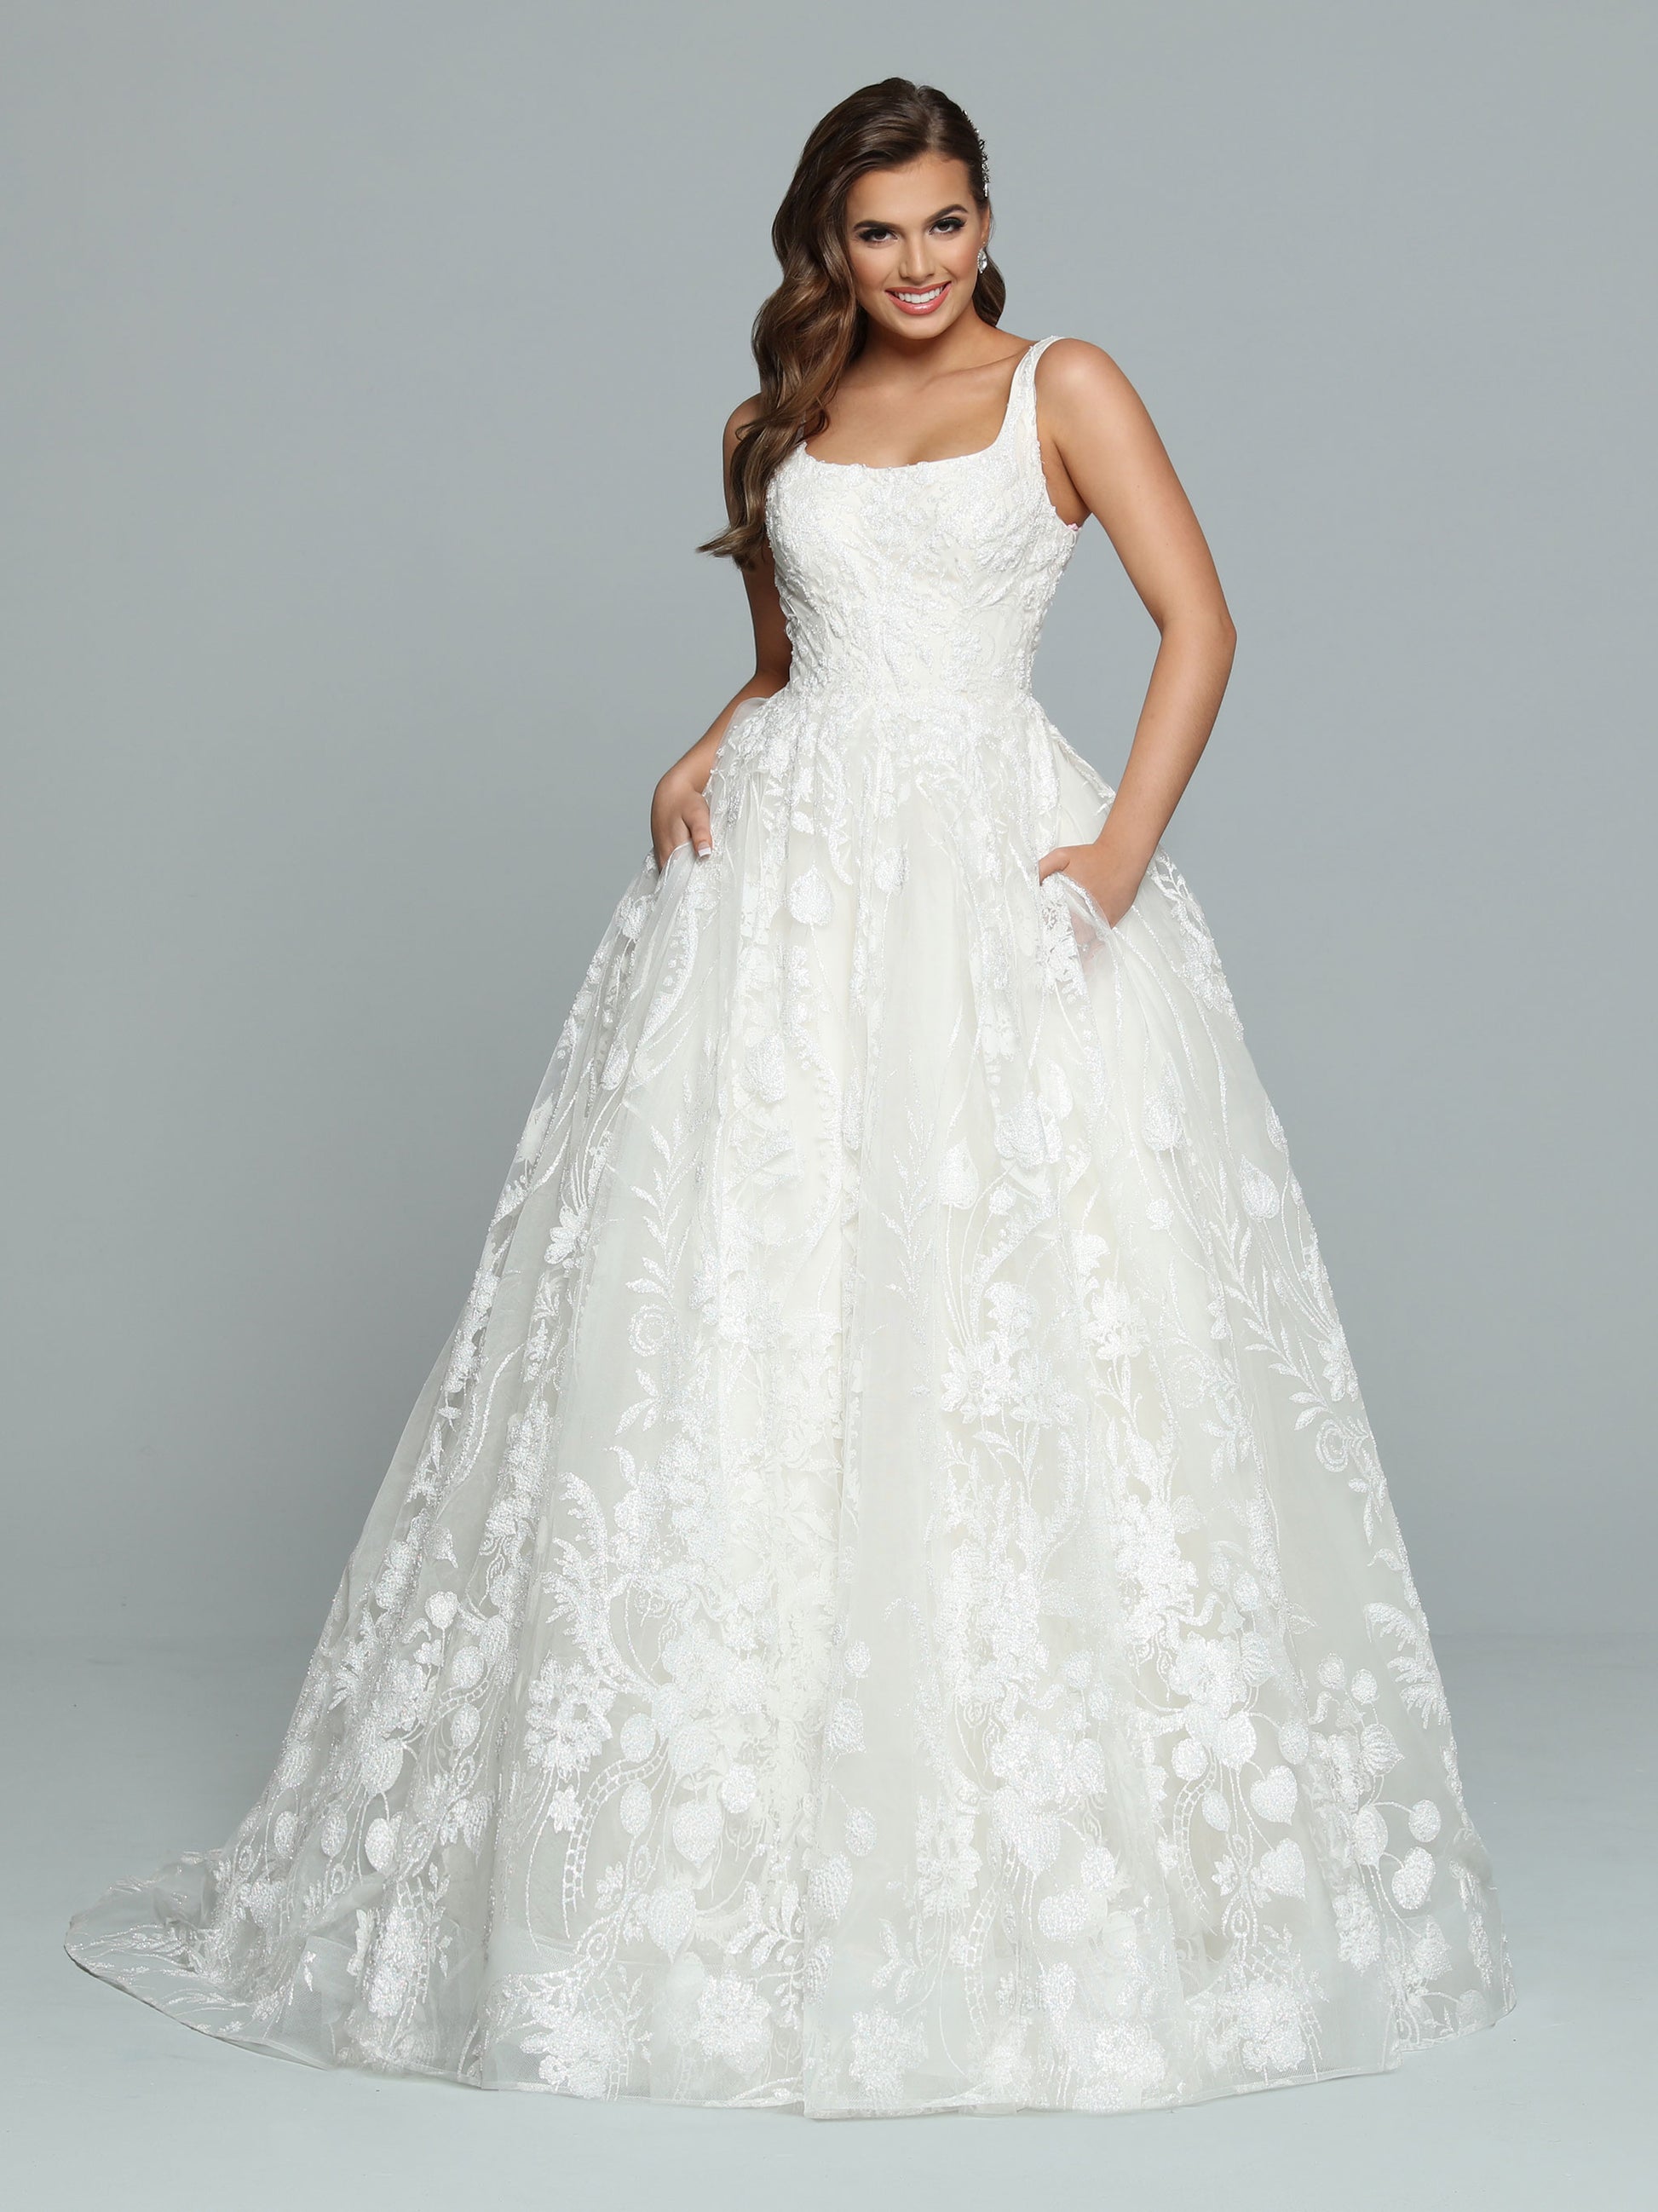 Davinci Bridal 50669 is a Gorgeous Shimmering A Line Ball gown with pockets! scoop neckline with wide straps. Pearlette accented shimmer lace. This wedding dress is an amazing bridal style!  Available Size: 12  Available Color: Ivory/Ivory